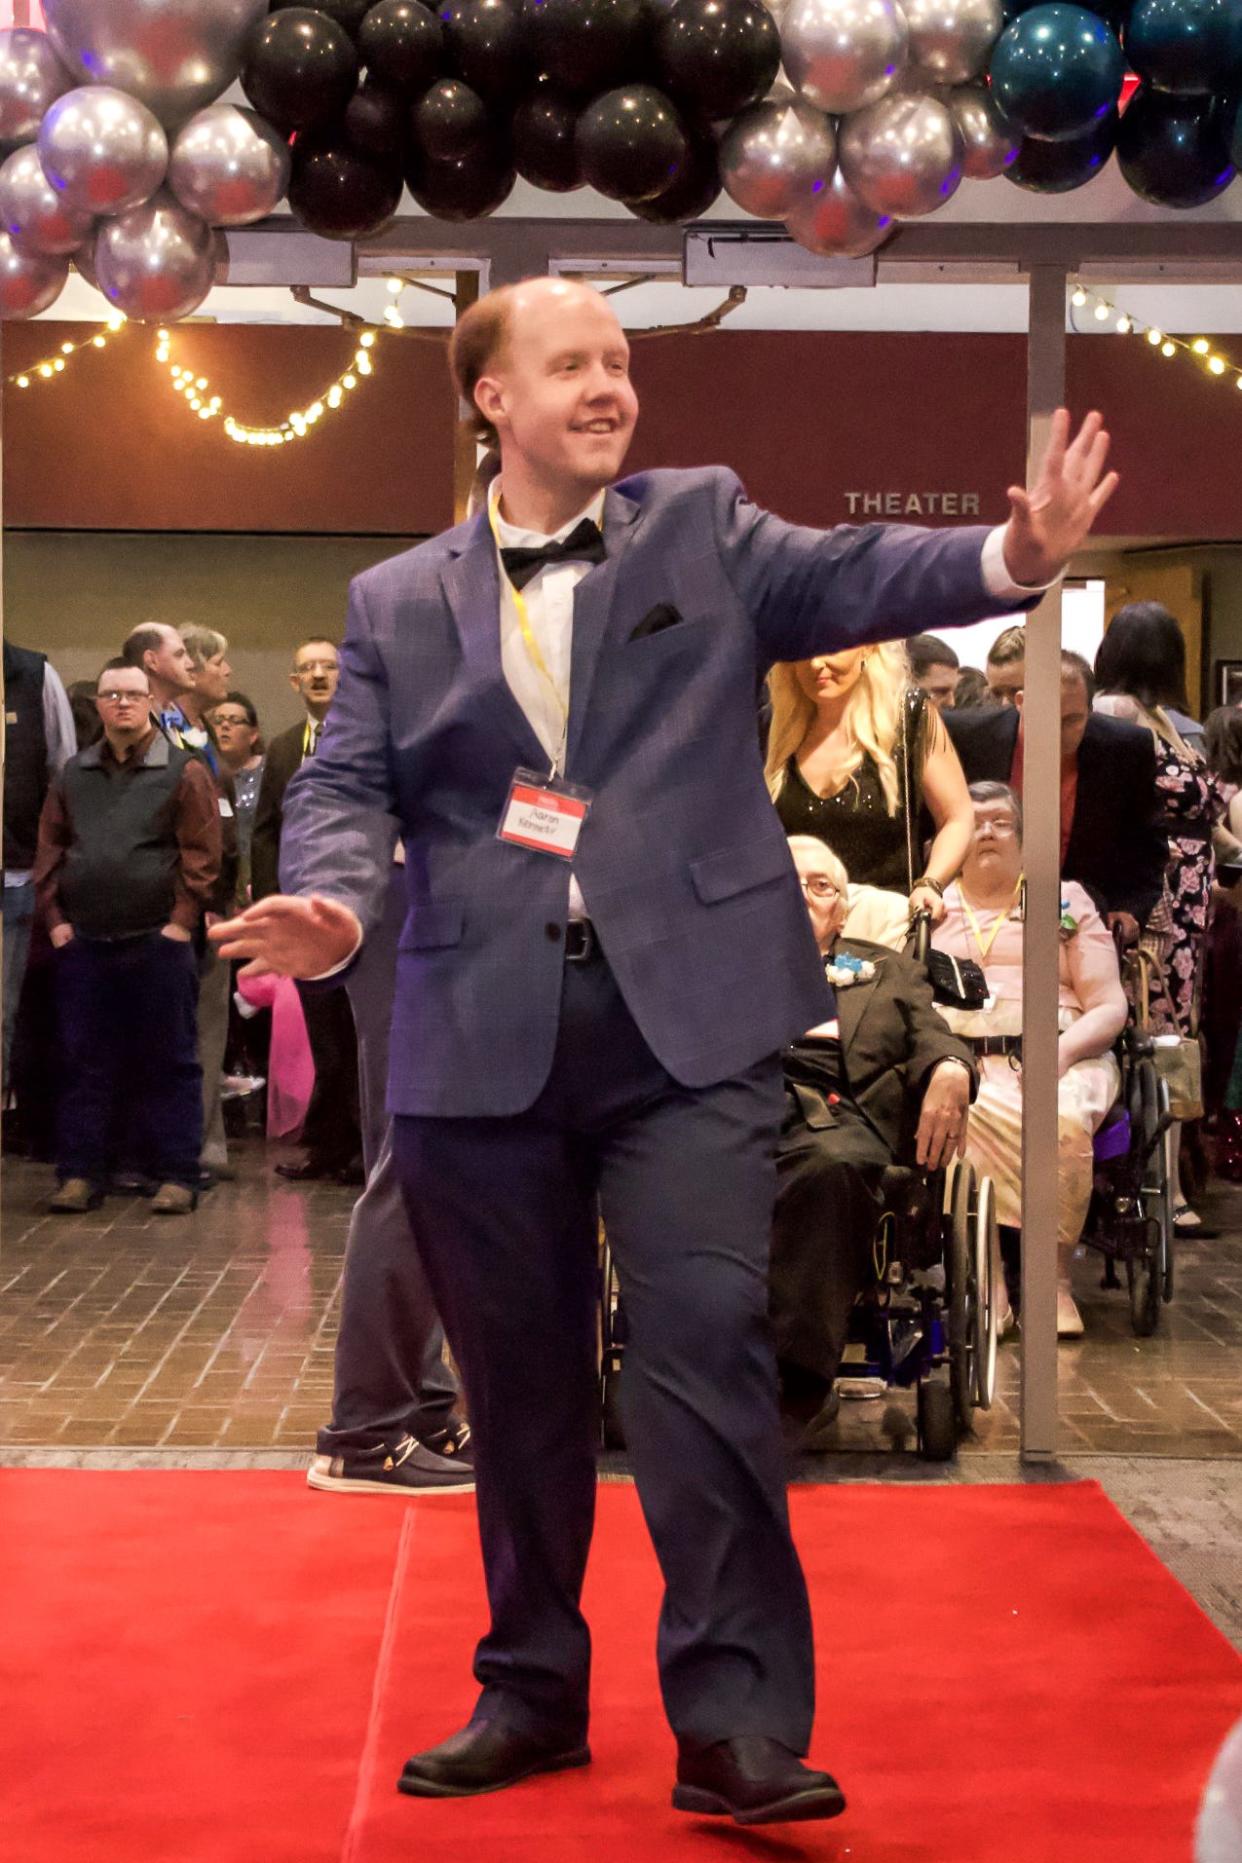 Aaron Kennedy walks the red carpet as he enters the Night to Shine event at Pritchard Laughlin Civic Center.